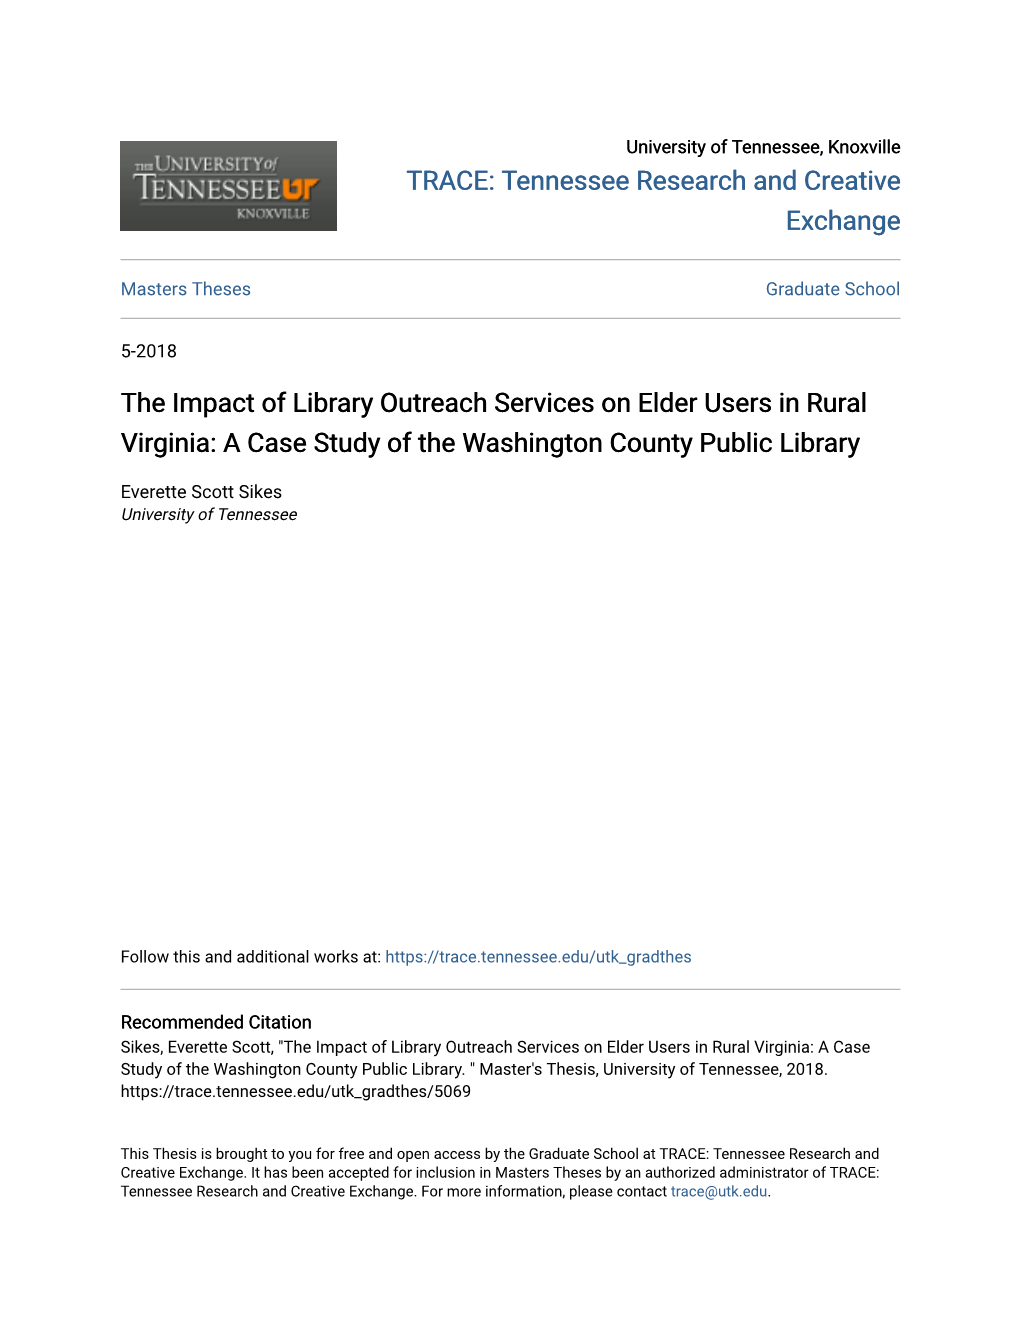 The Impact of Library Outreach Services on Elder Users in Rural Virginia: a Case Study of the Washington County Public Library